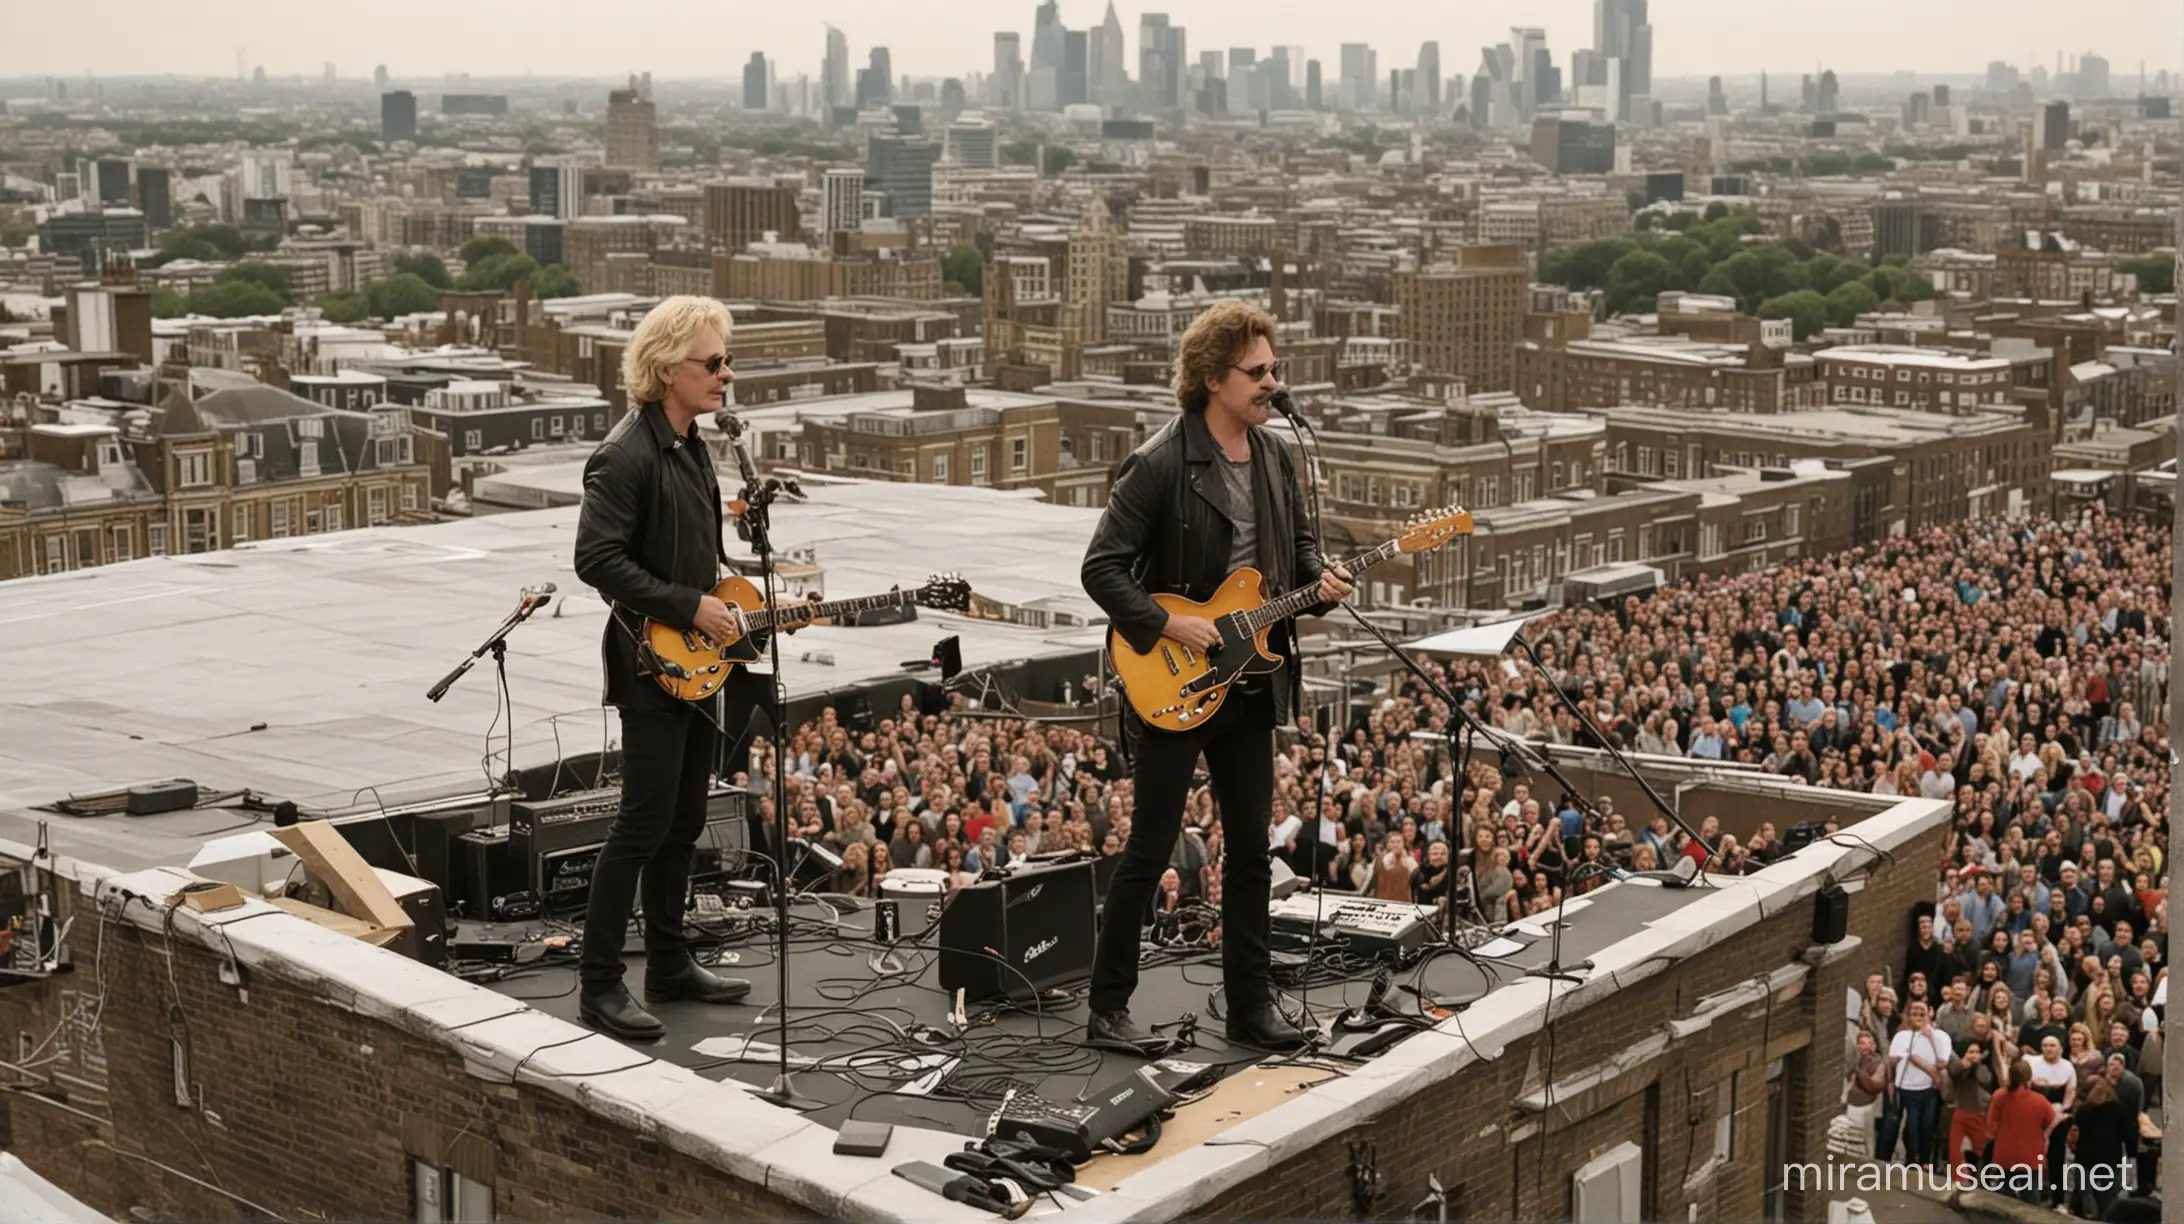 Hall & Oates in concert on the roof on a building in London